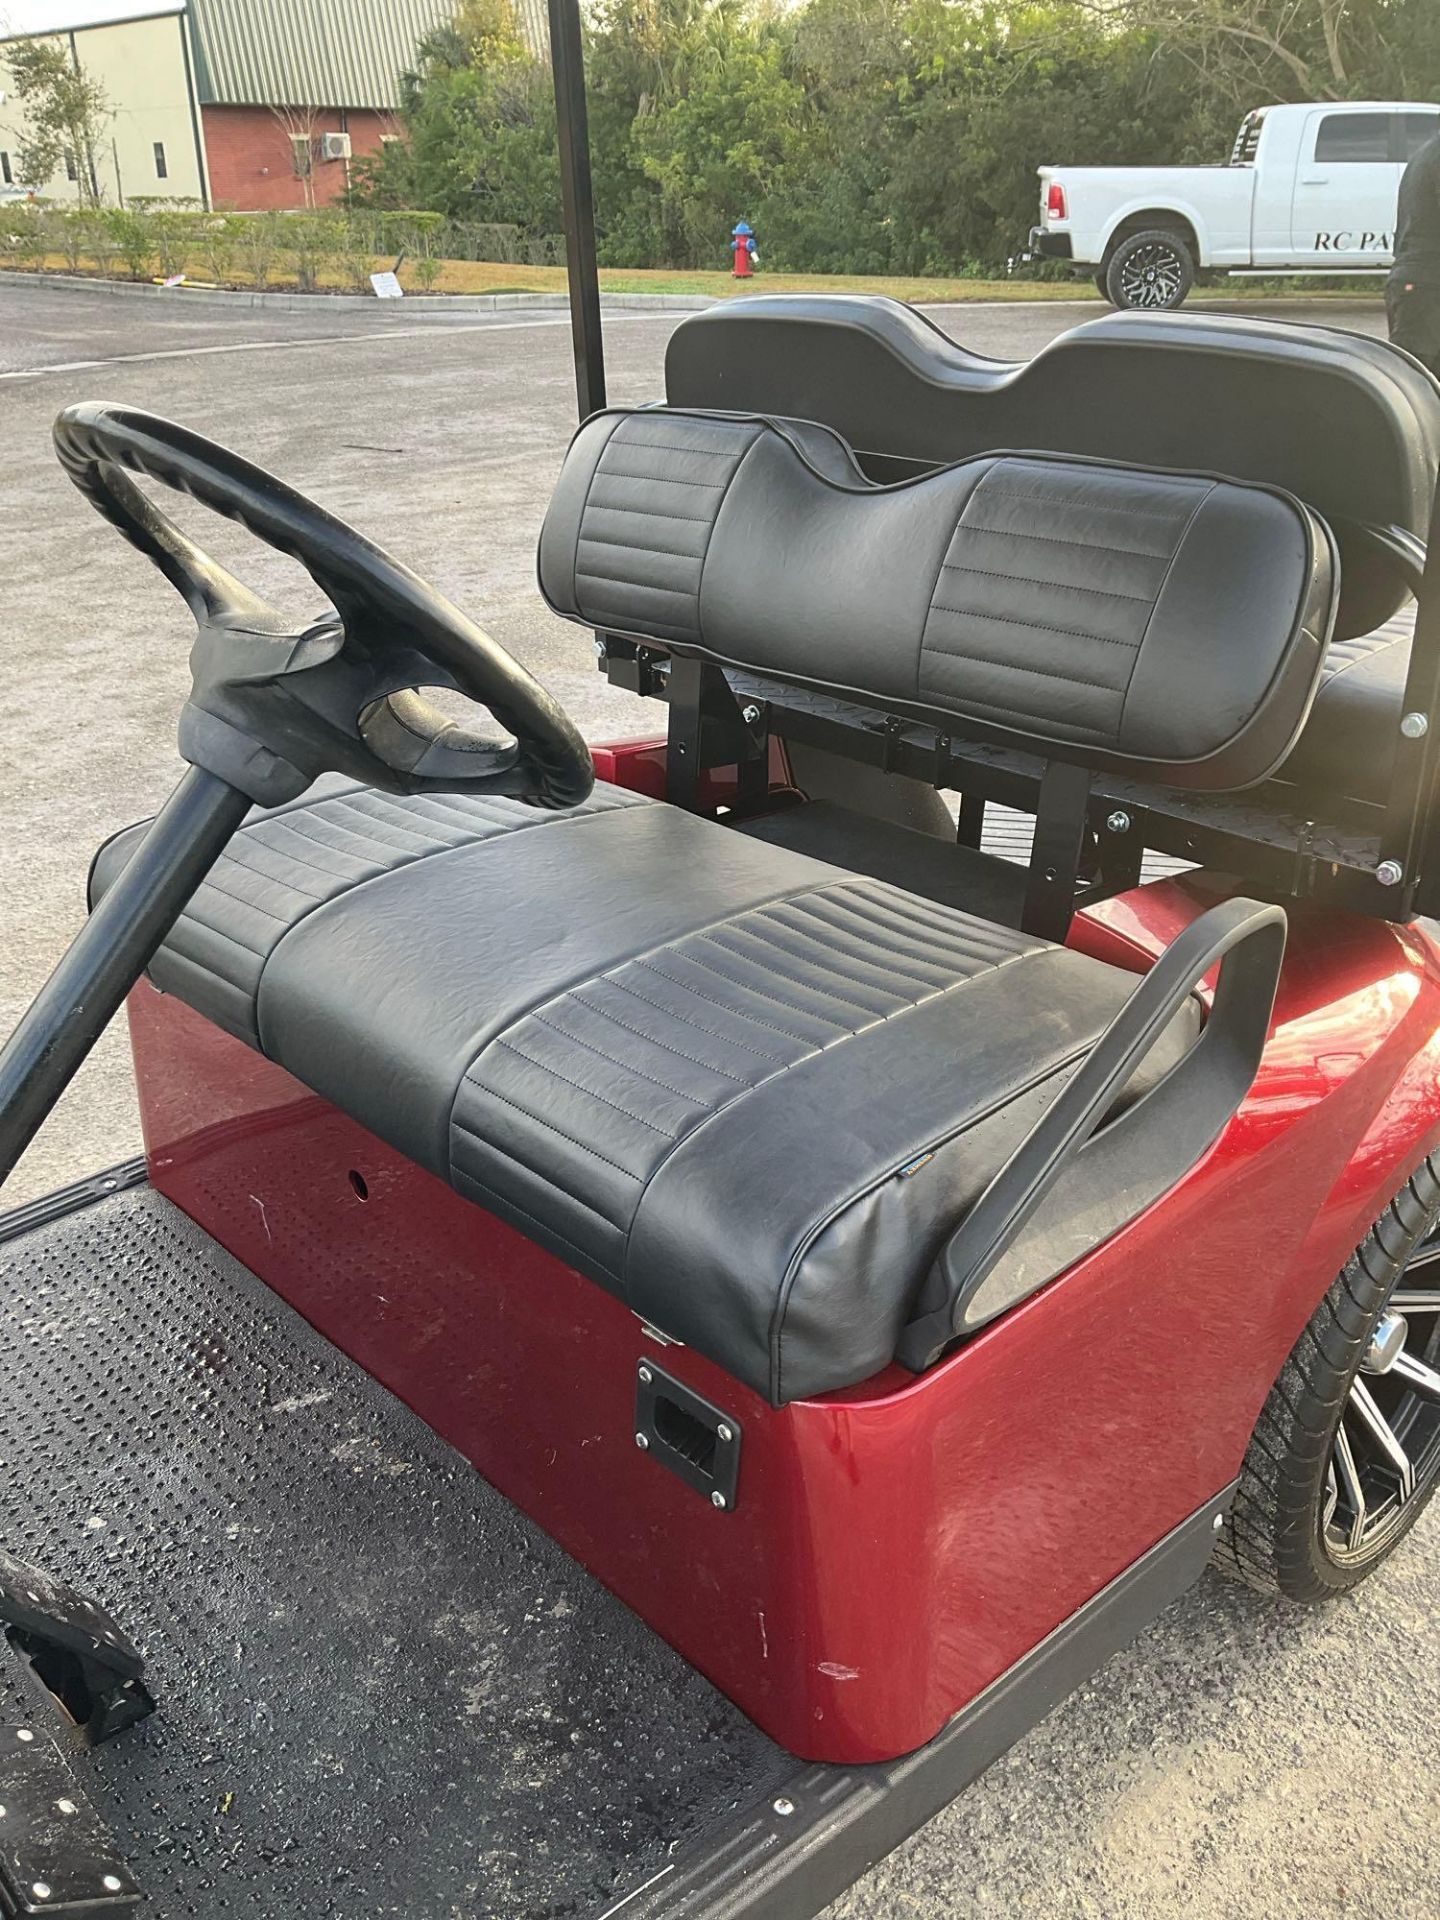 EZ-GO GOLF CART , ELECTRIC, BACK SEAT FOLD DOWN TO FLAT BED, BATTERY CHARGER INCLUDED, BILL OF SALE - Image 10 of 13